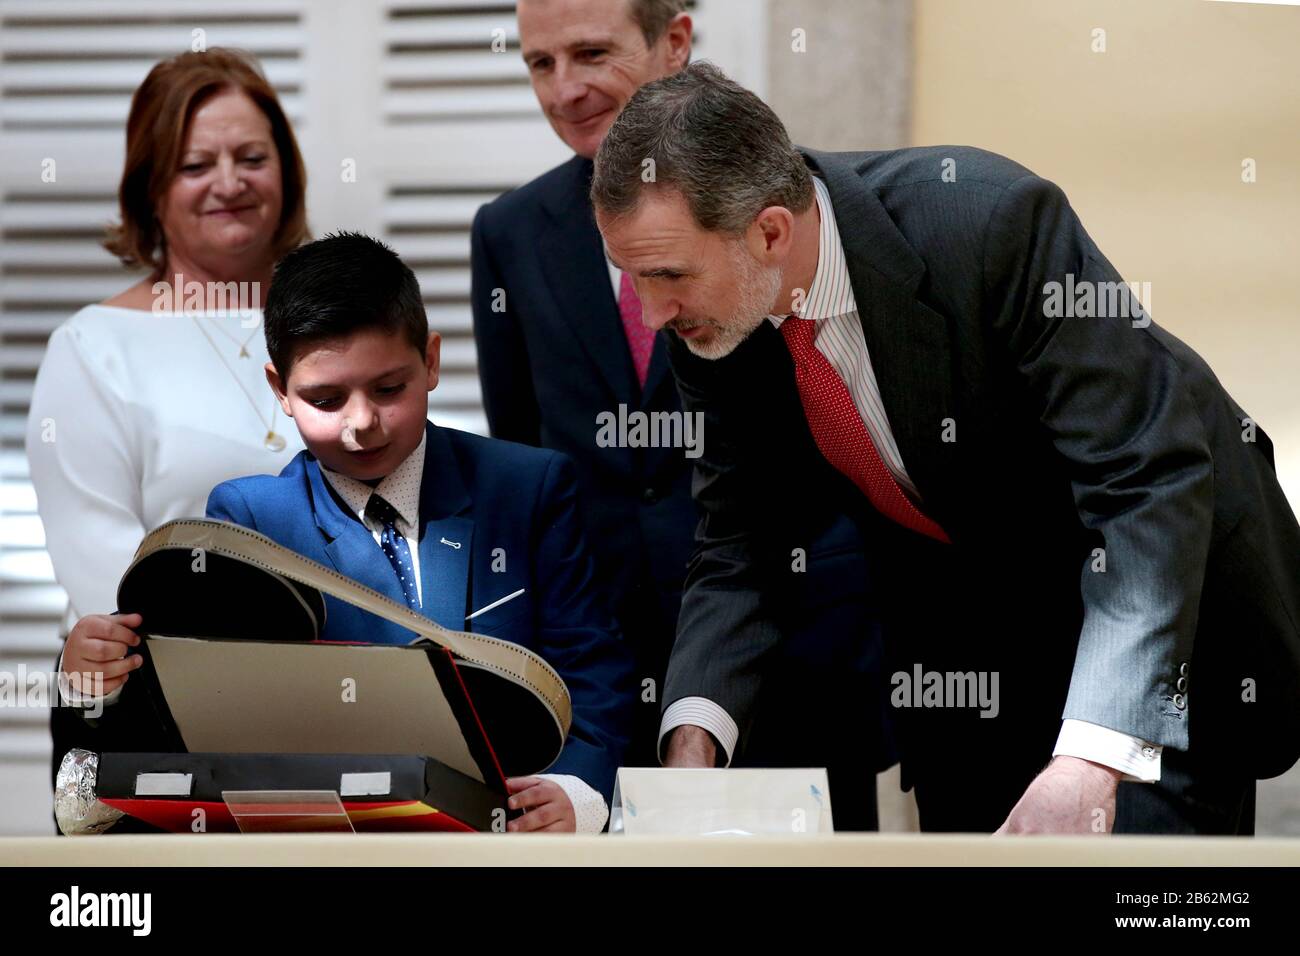 Madrid, Spain; 09/03/2020.- School contest What is a King to you? the audience with the winners of the XXXVIII edition of this contest, convened by the Spanish Institutional Foundation (FIES) at the Palacio del Pardo. King Felipe VI talks with each of the winners by communities about their work.For the student Ruben Marin of Castilla-La Mancha, the head of state is like a Super 8 film camera with a roll of film in which, frame by frame, he recounts his life since he was prince Photo: Juan Carlos Rojas/Picture Alliance | usage worldwide Stock Photo